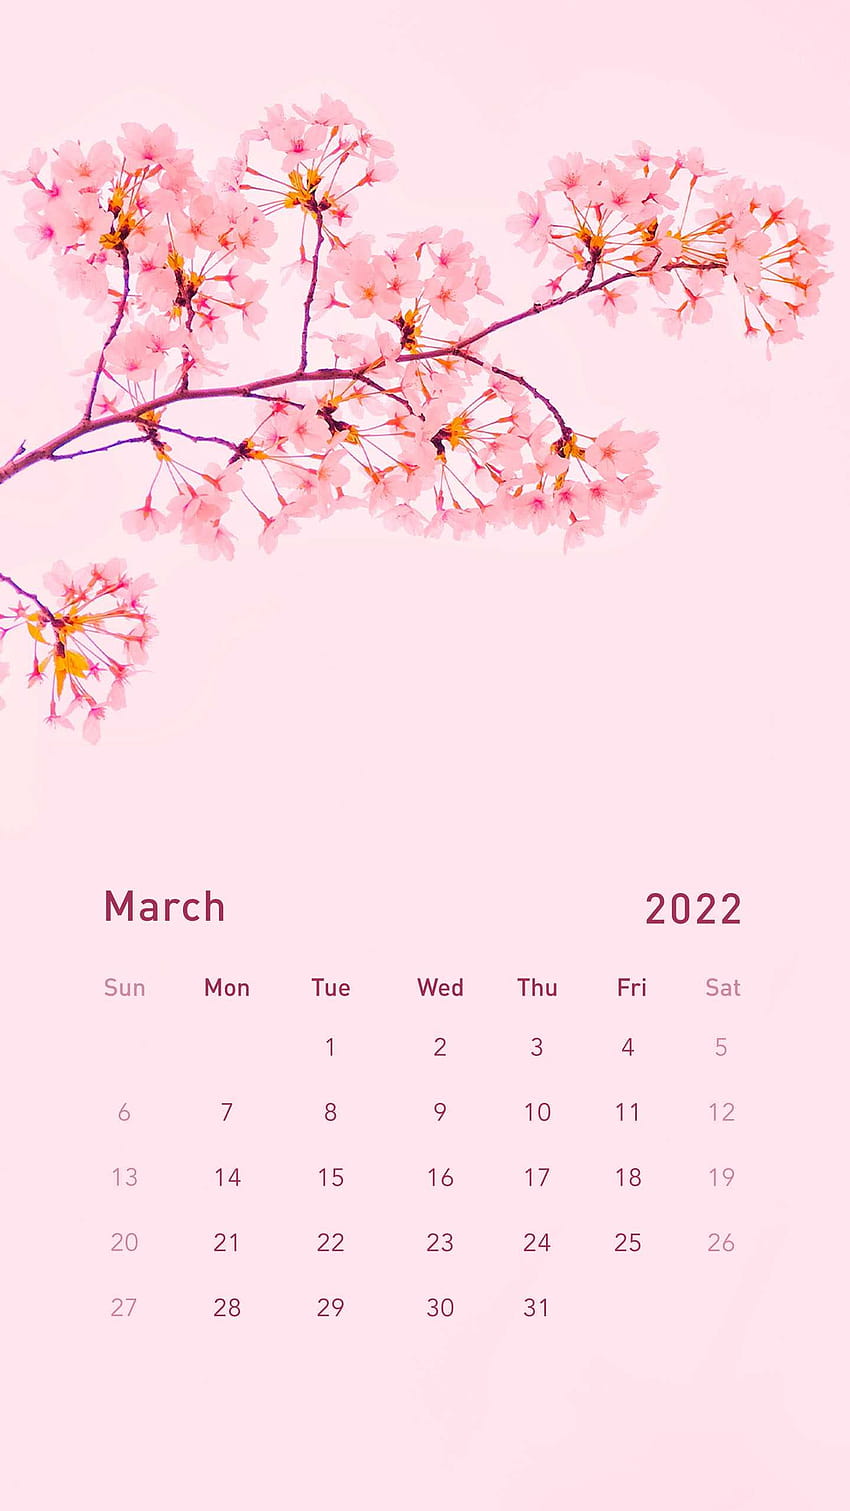 Download wallpapers March 2022 Calendar 4k pink tulips spring background  with tulips March 2022 spring calendars spring flowers 2022 March  Calendar for desktop with resolution 3840x2400 High Quality HD pictures  wallpapers